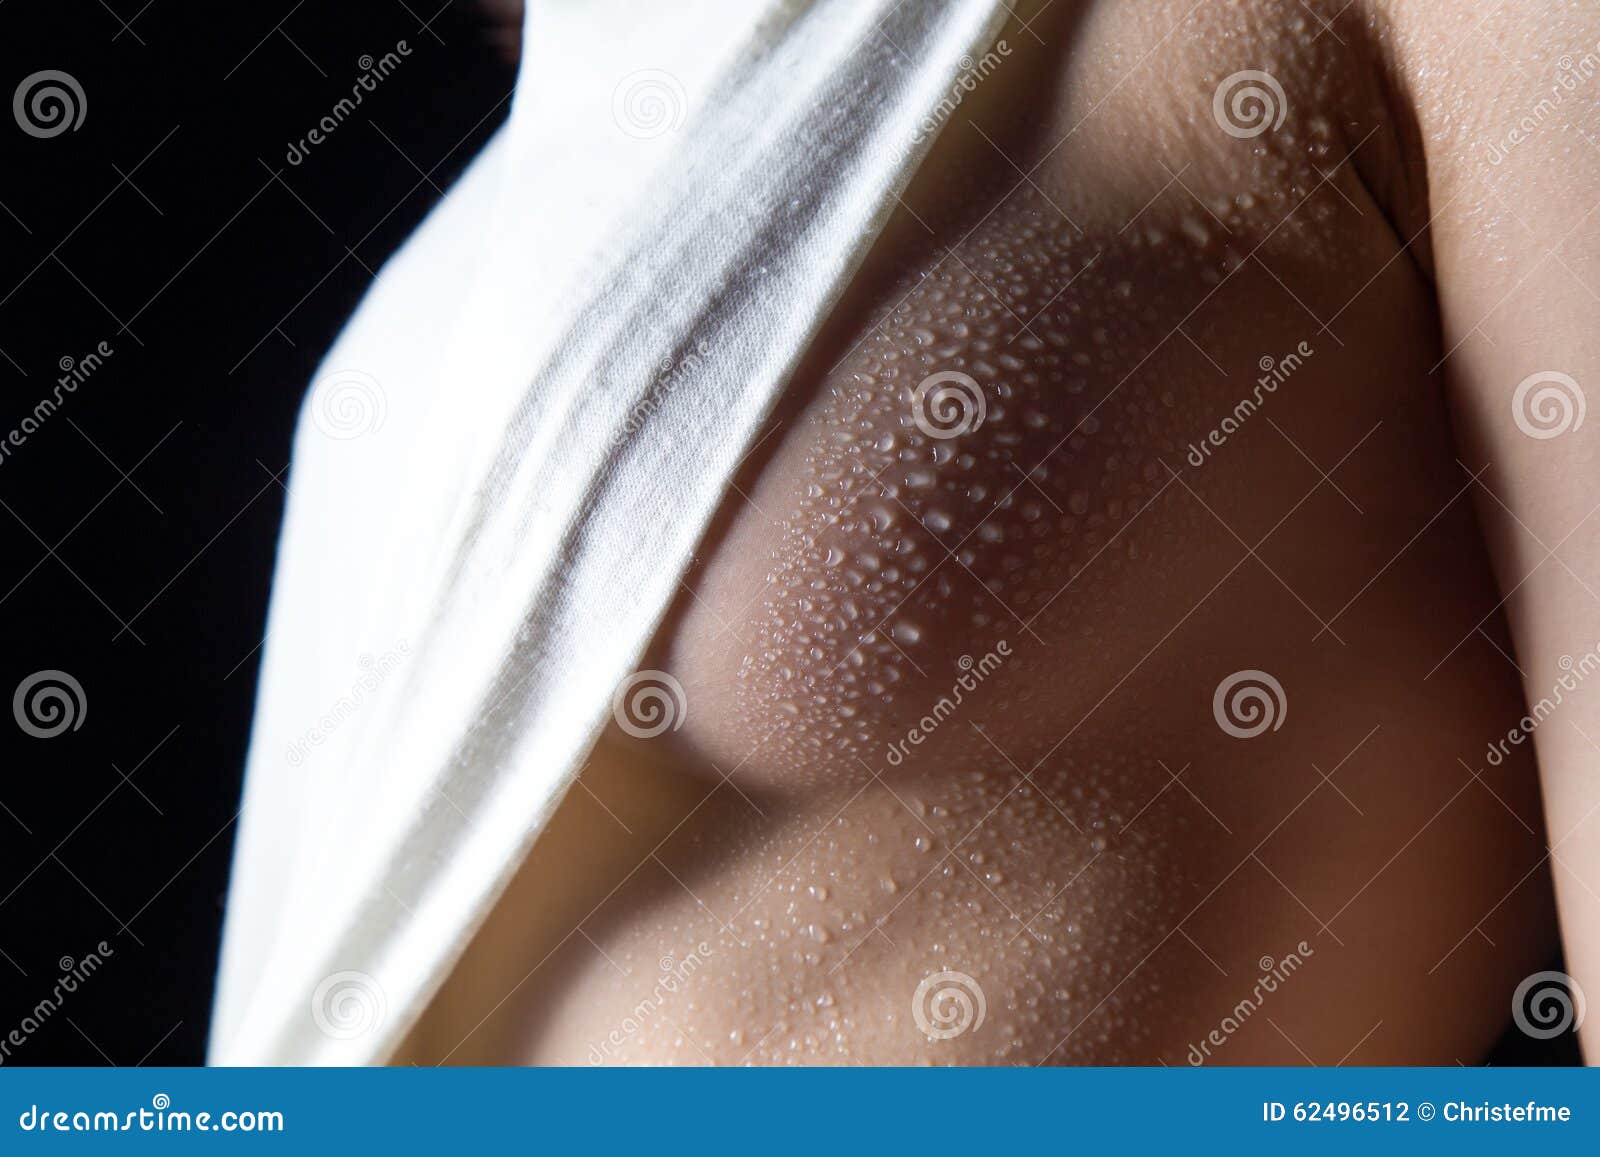 Woman S Breast with Drops in Shadow Stock Photo - Image of profile, cotton:  62496512